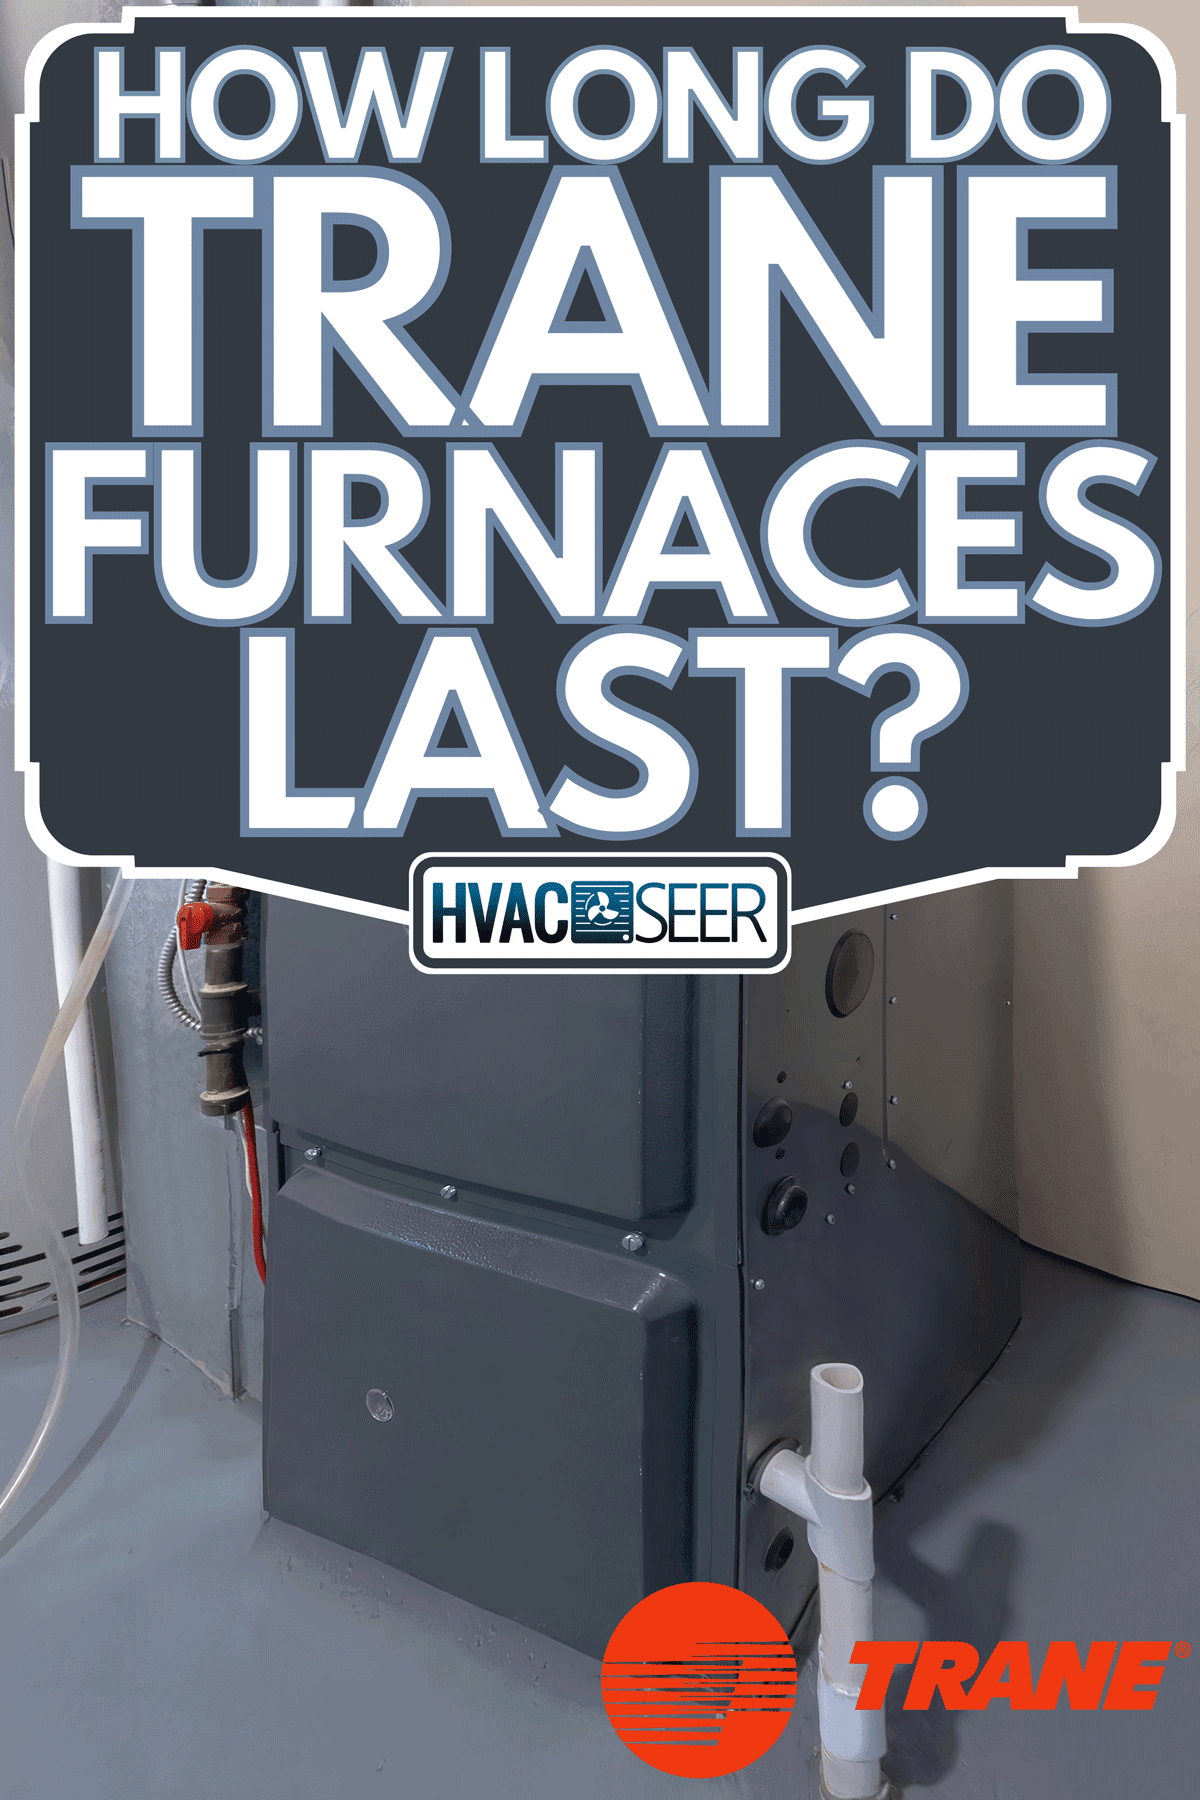 High energy efficient furnace in a basement, How Long Do Trane Furnaces Last?